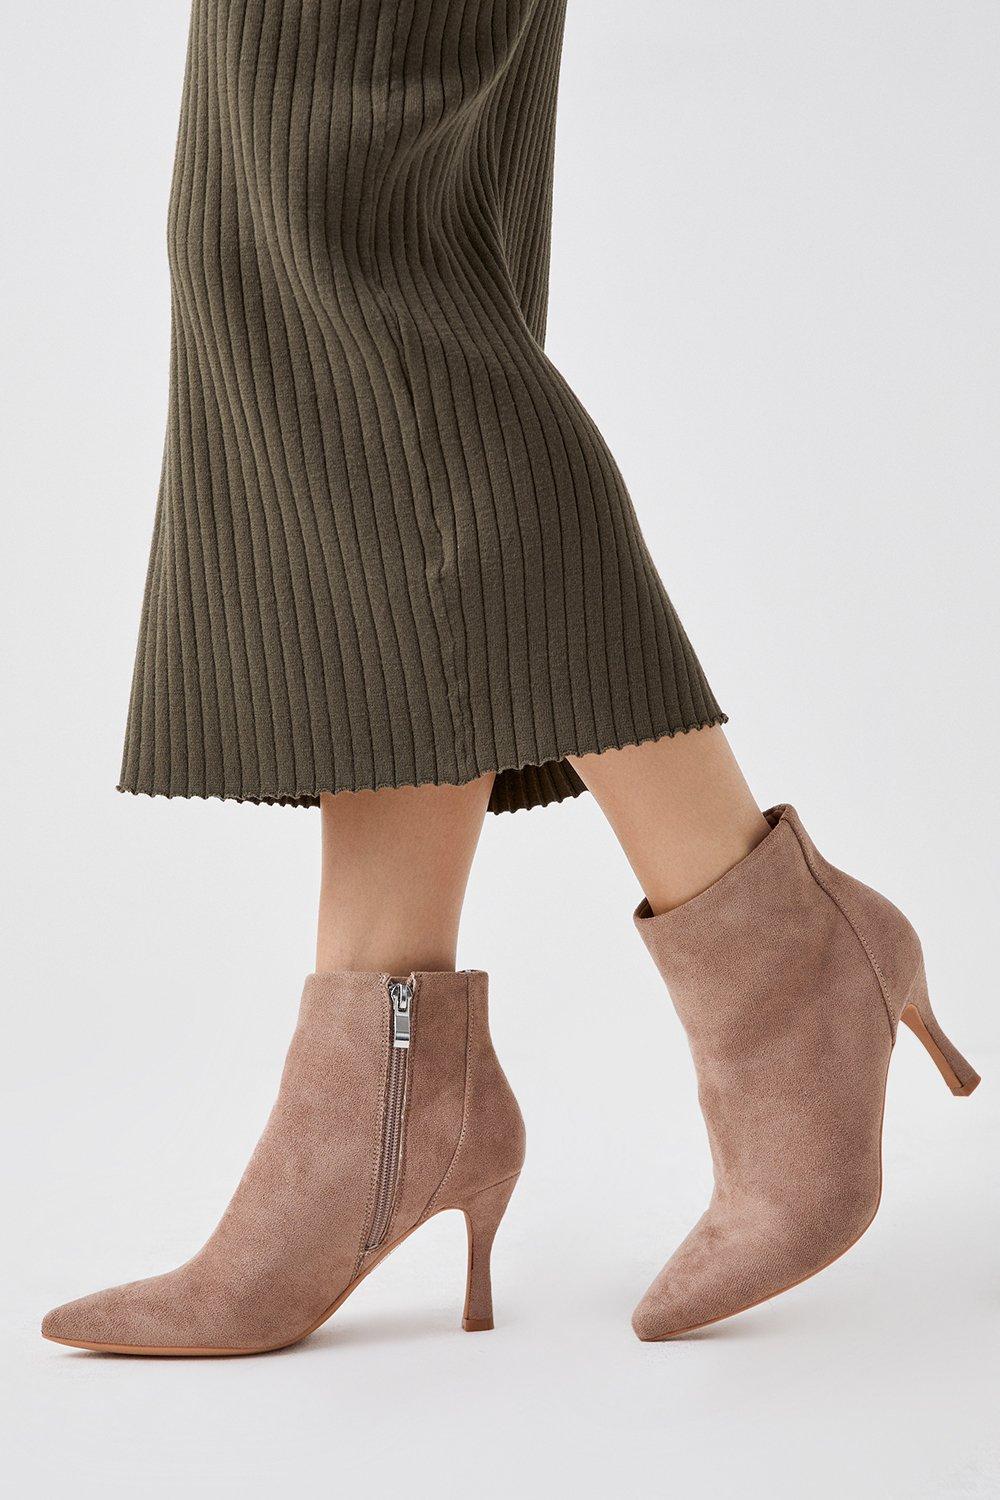 Women’s Principles: Ophelia Pointed Medium Heel Ankle Boots - taupe - 7